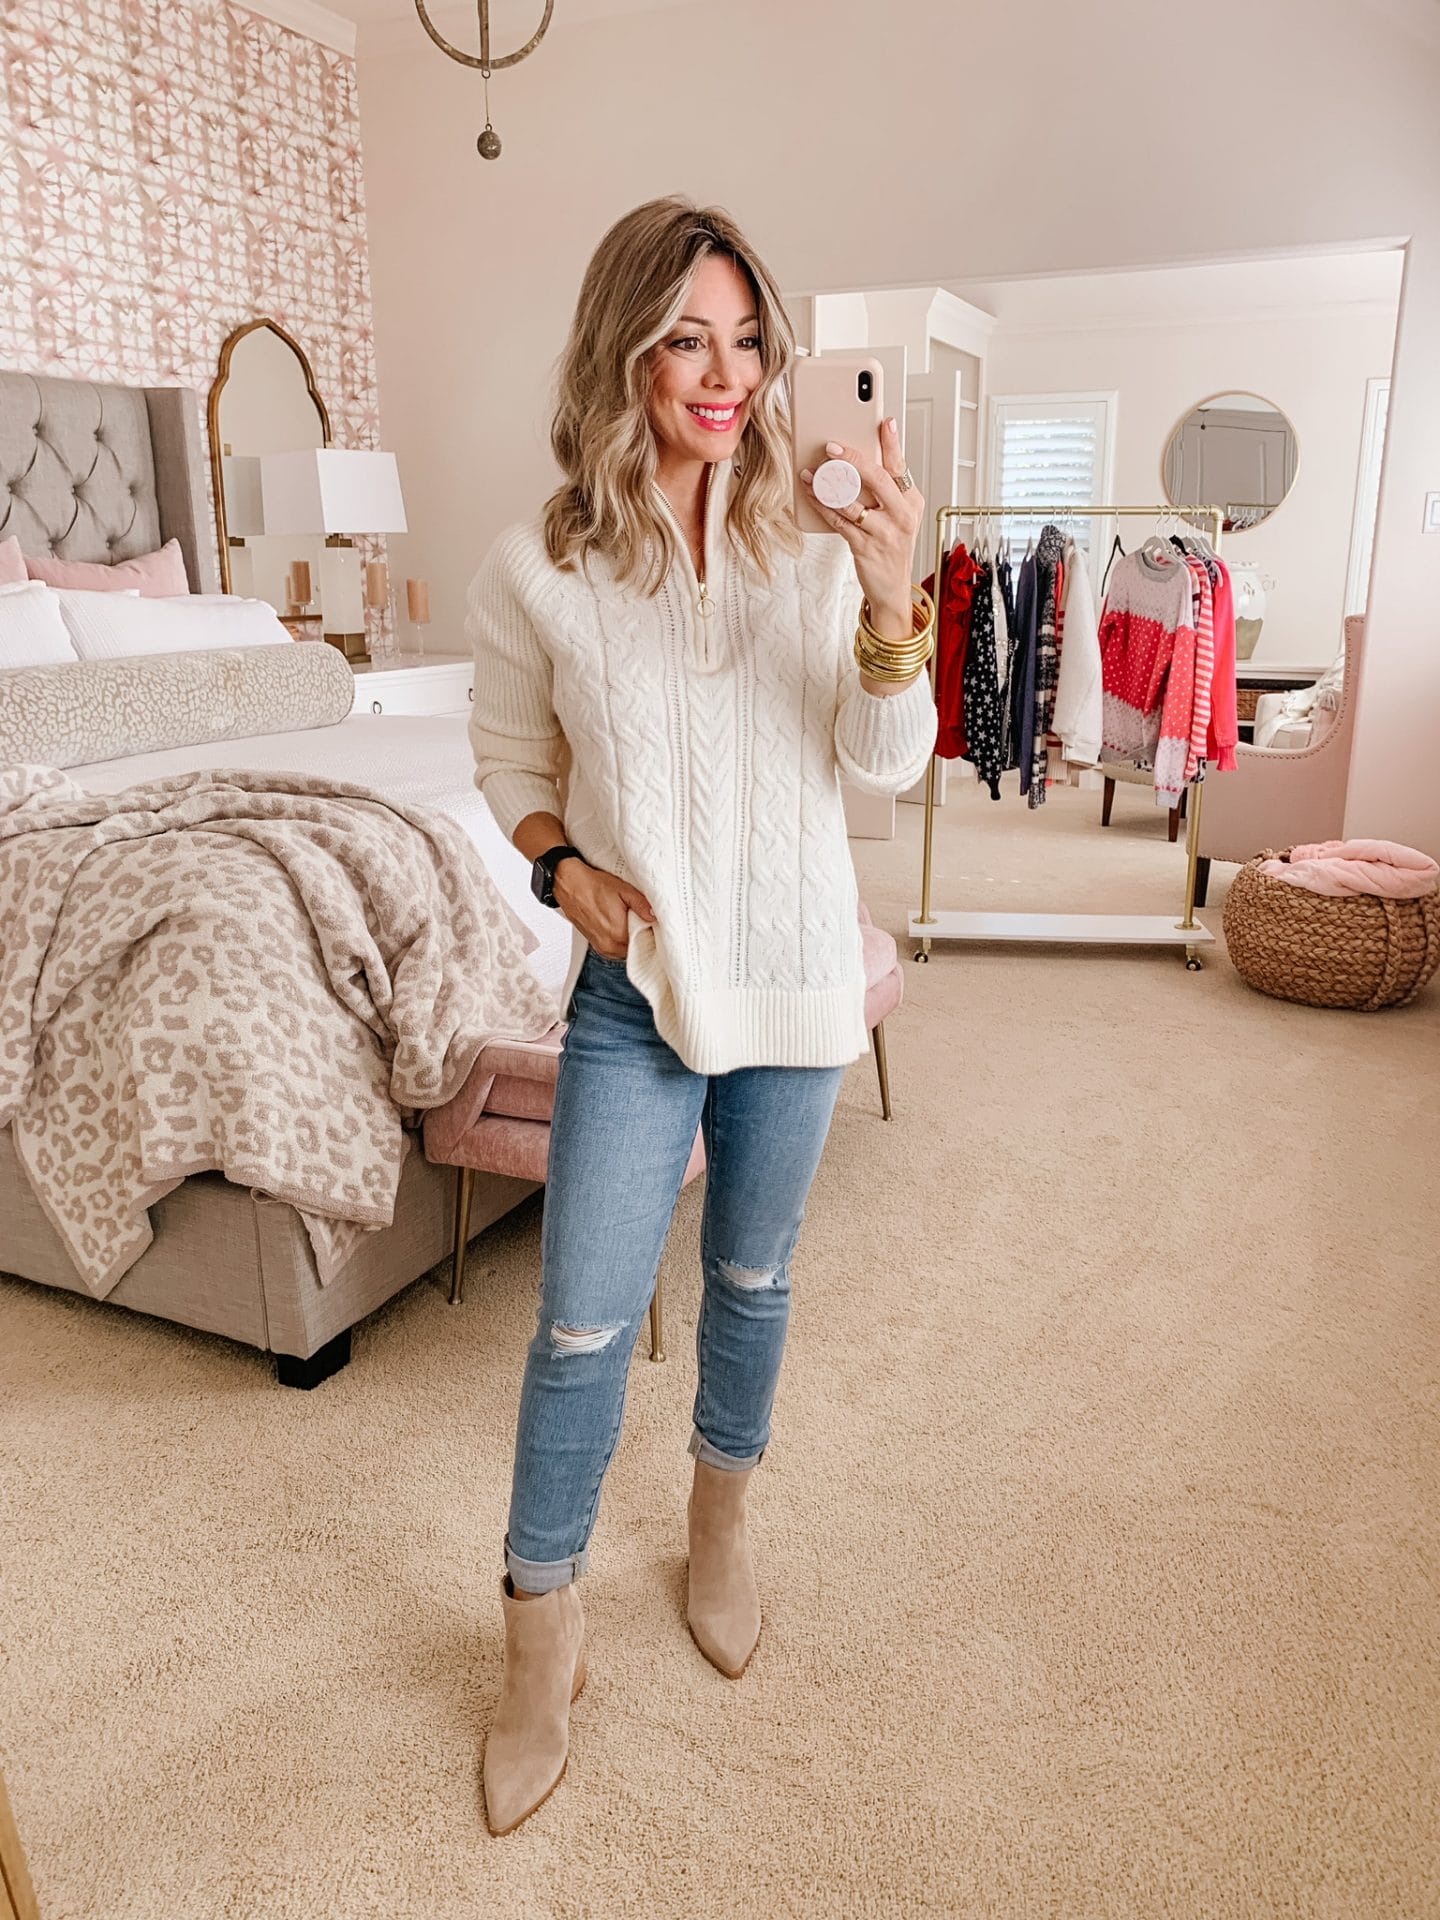 Cable Knit Half Zip Sweater, Jeans, Booties 